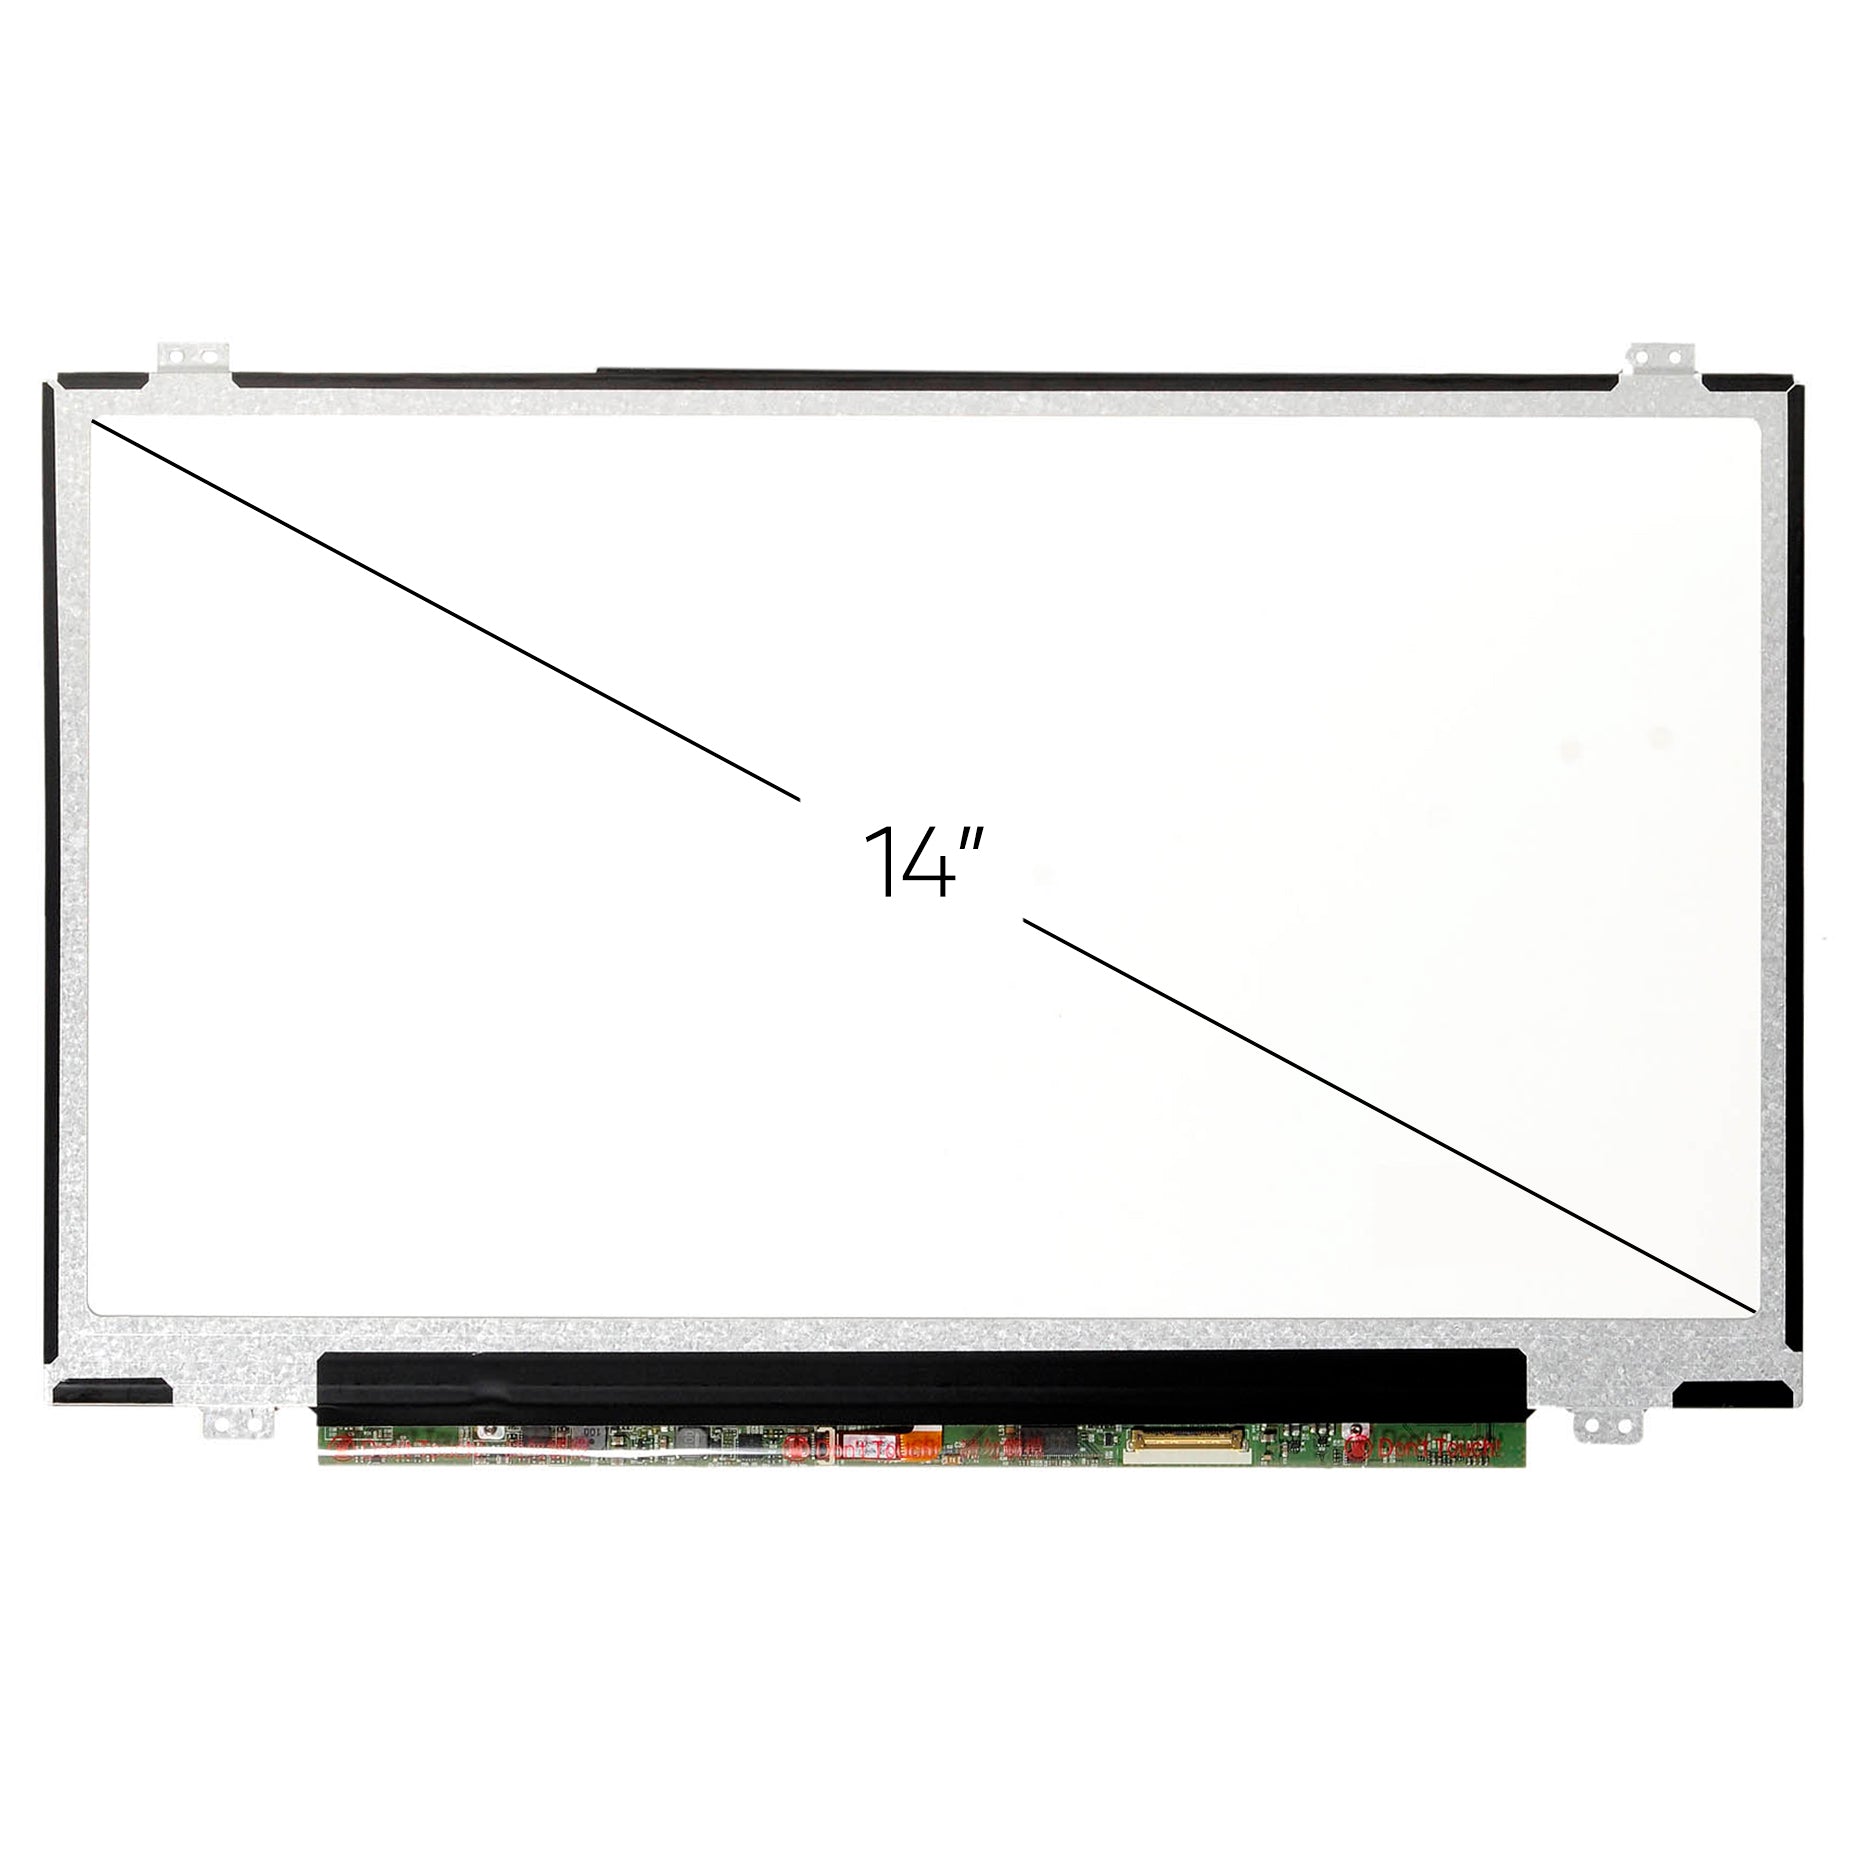 Screen Replacement for ASUS Zenbook UX430UA-Q52S-CB FHD 1920x1080 IPS Matte LCD LED Display